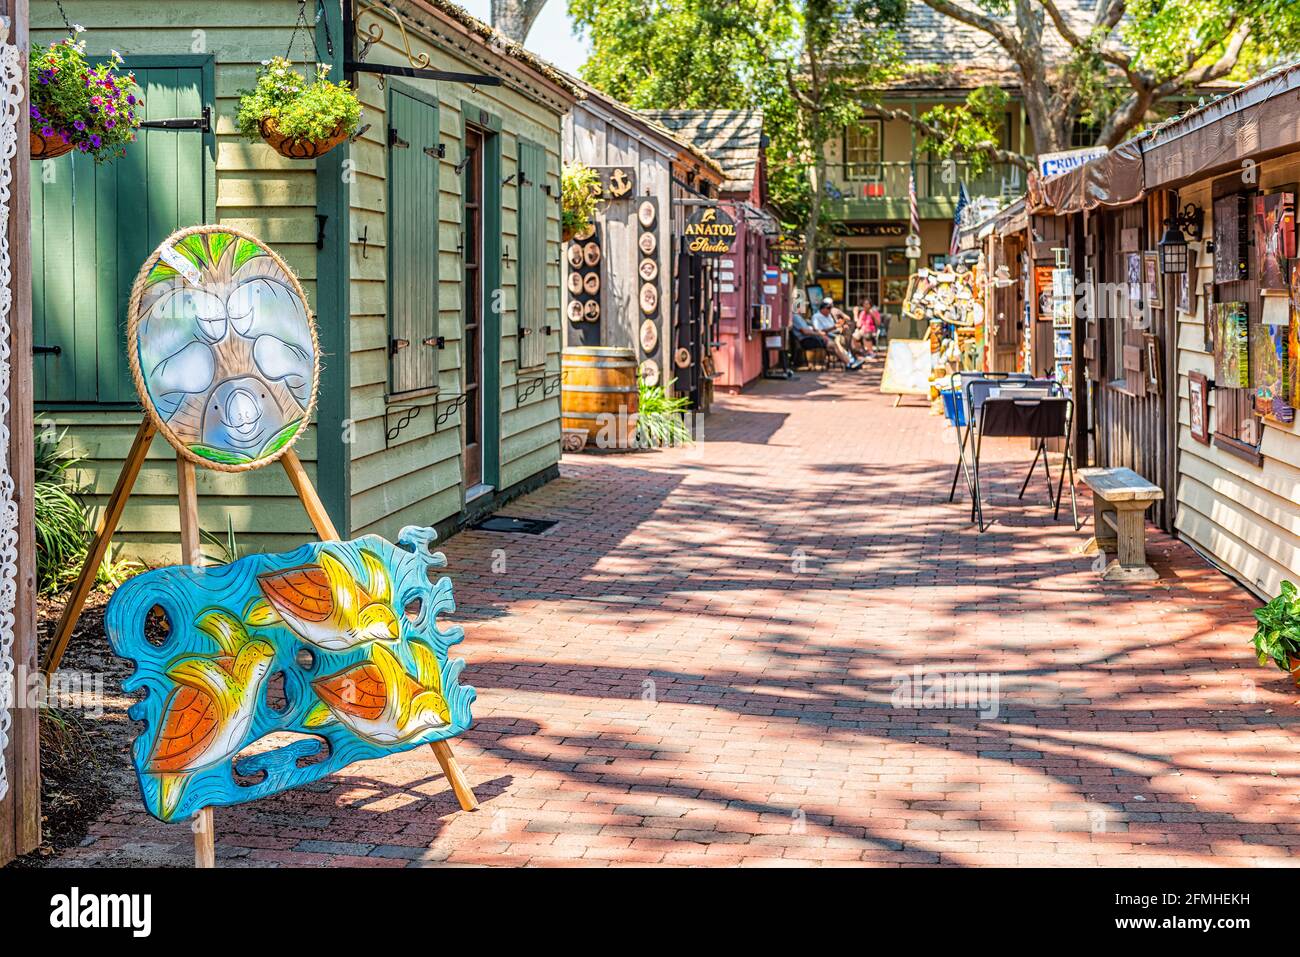 St. Augustine, USA - May 10, 2018: Saint George Street with artwork on sunny day in downtown old town Florida city in Art alley called Arcade of Profe Stock Photo